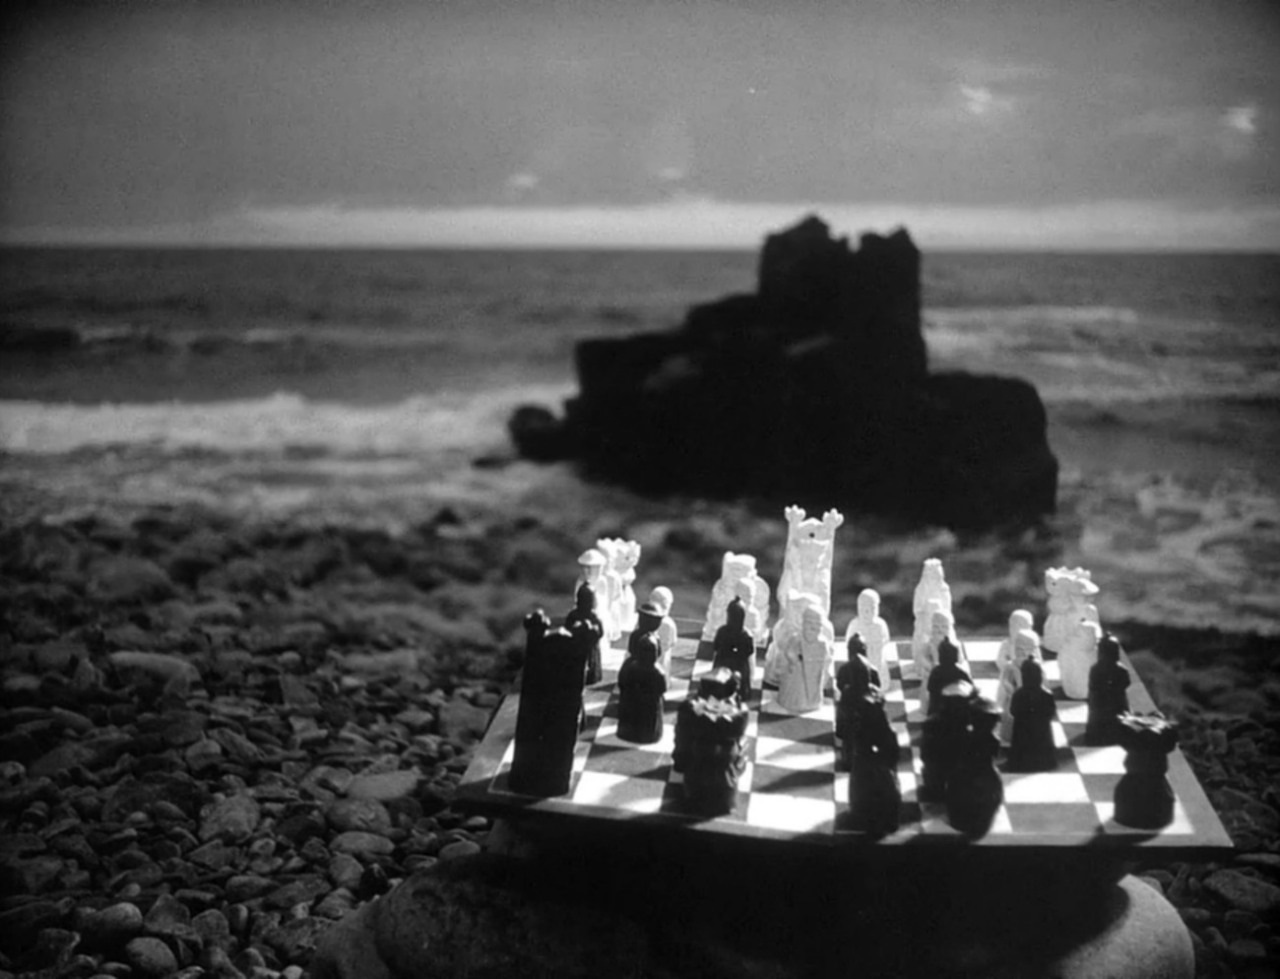 THE SEVENTH SEAL (1957)